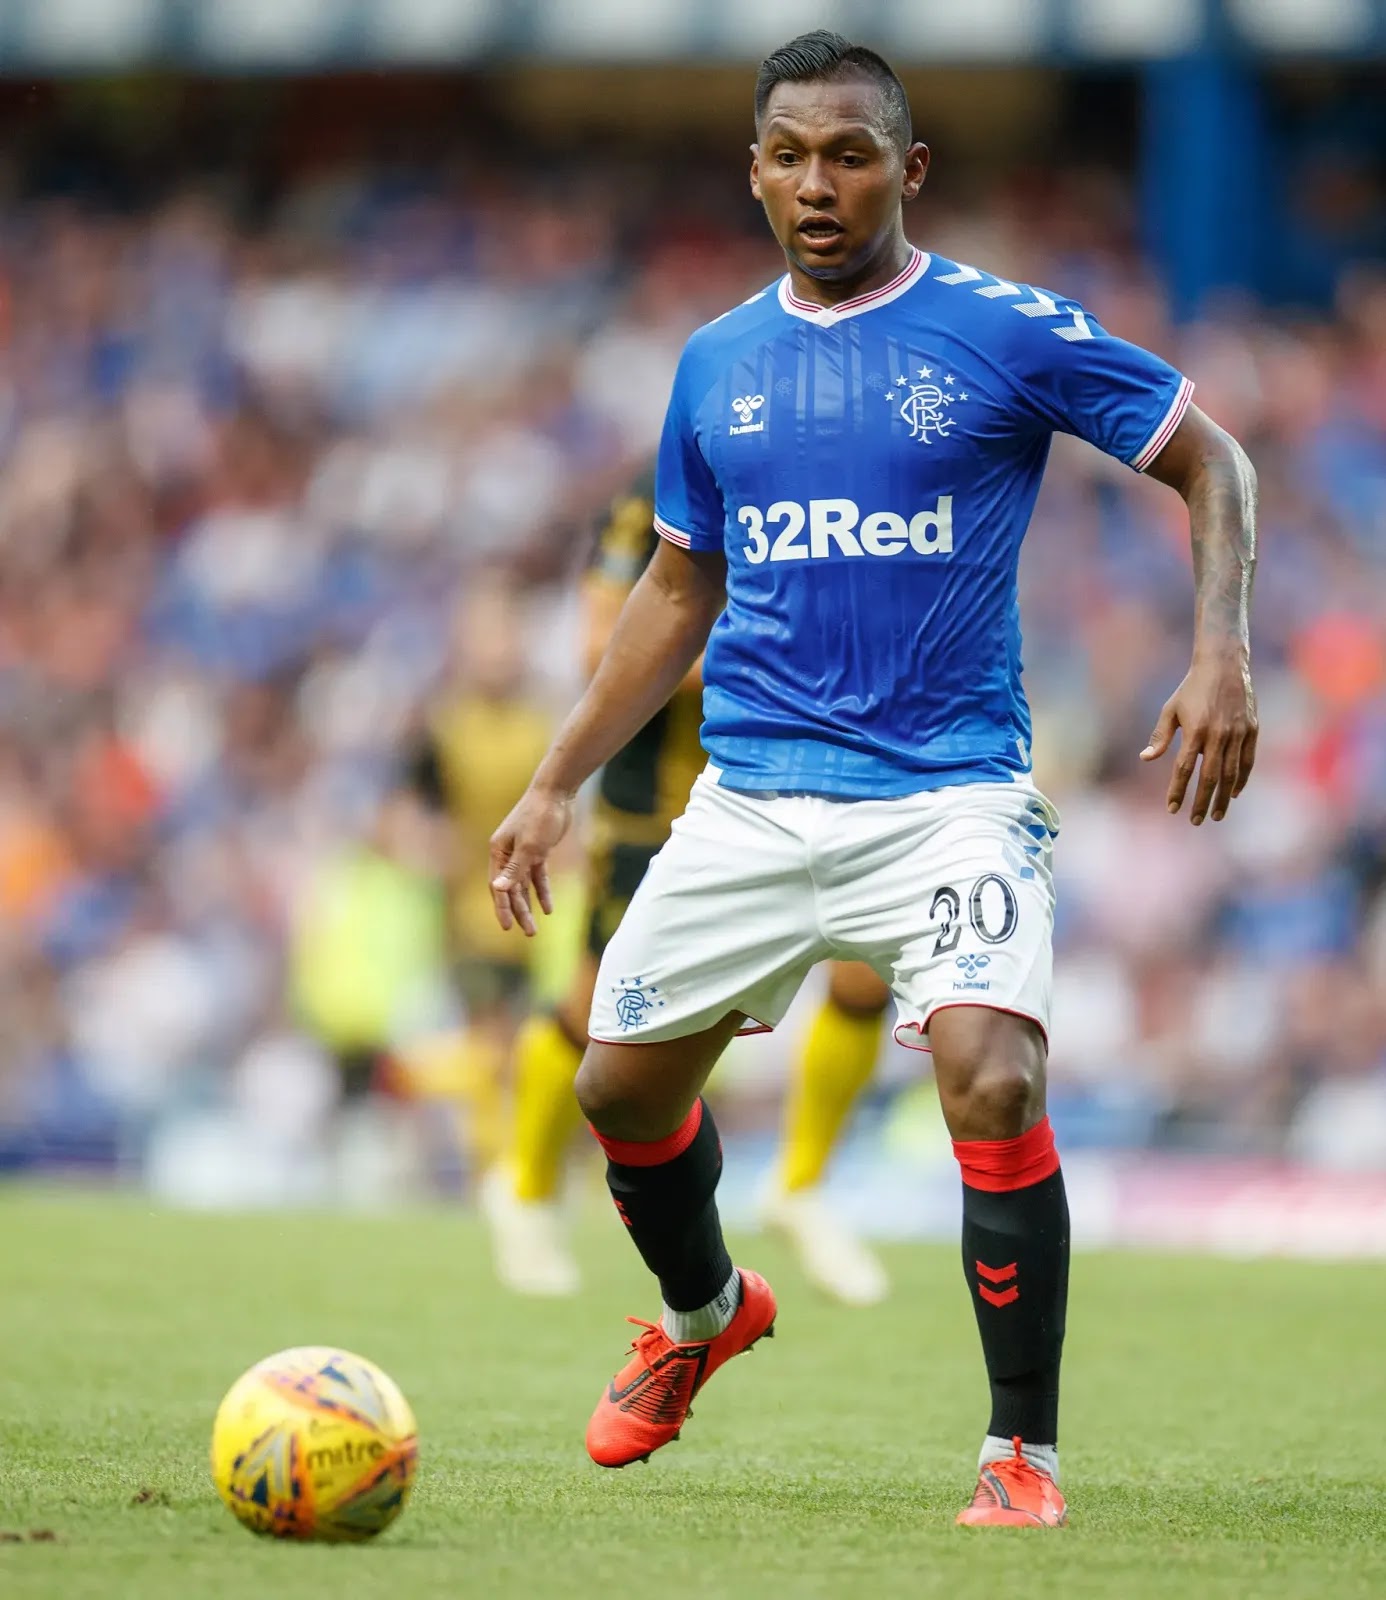 El-buffalo – Rangers fans will love this message from striker